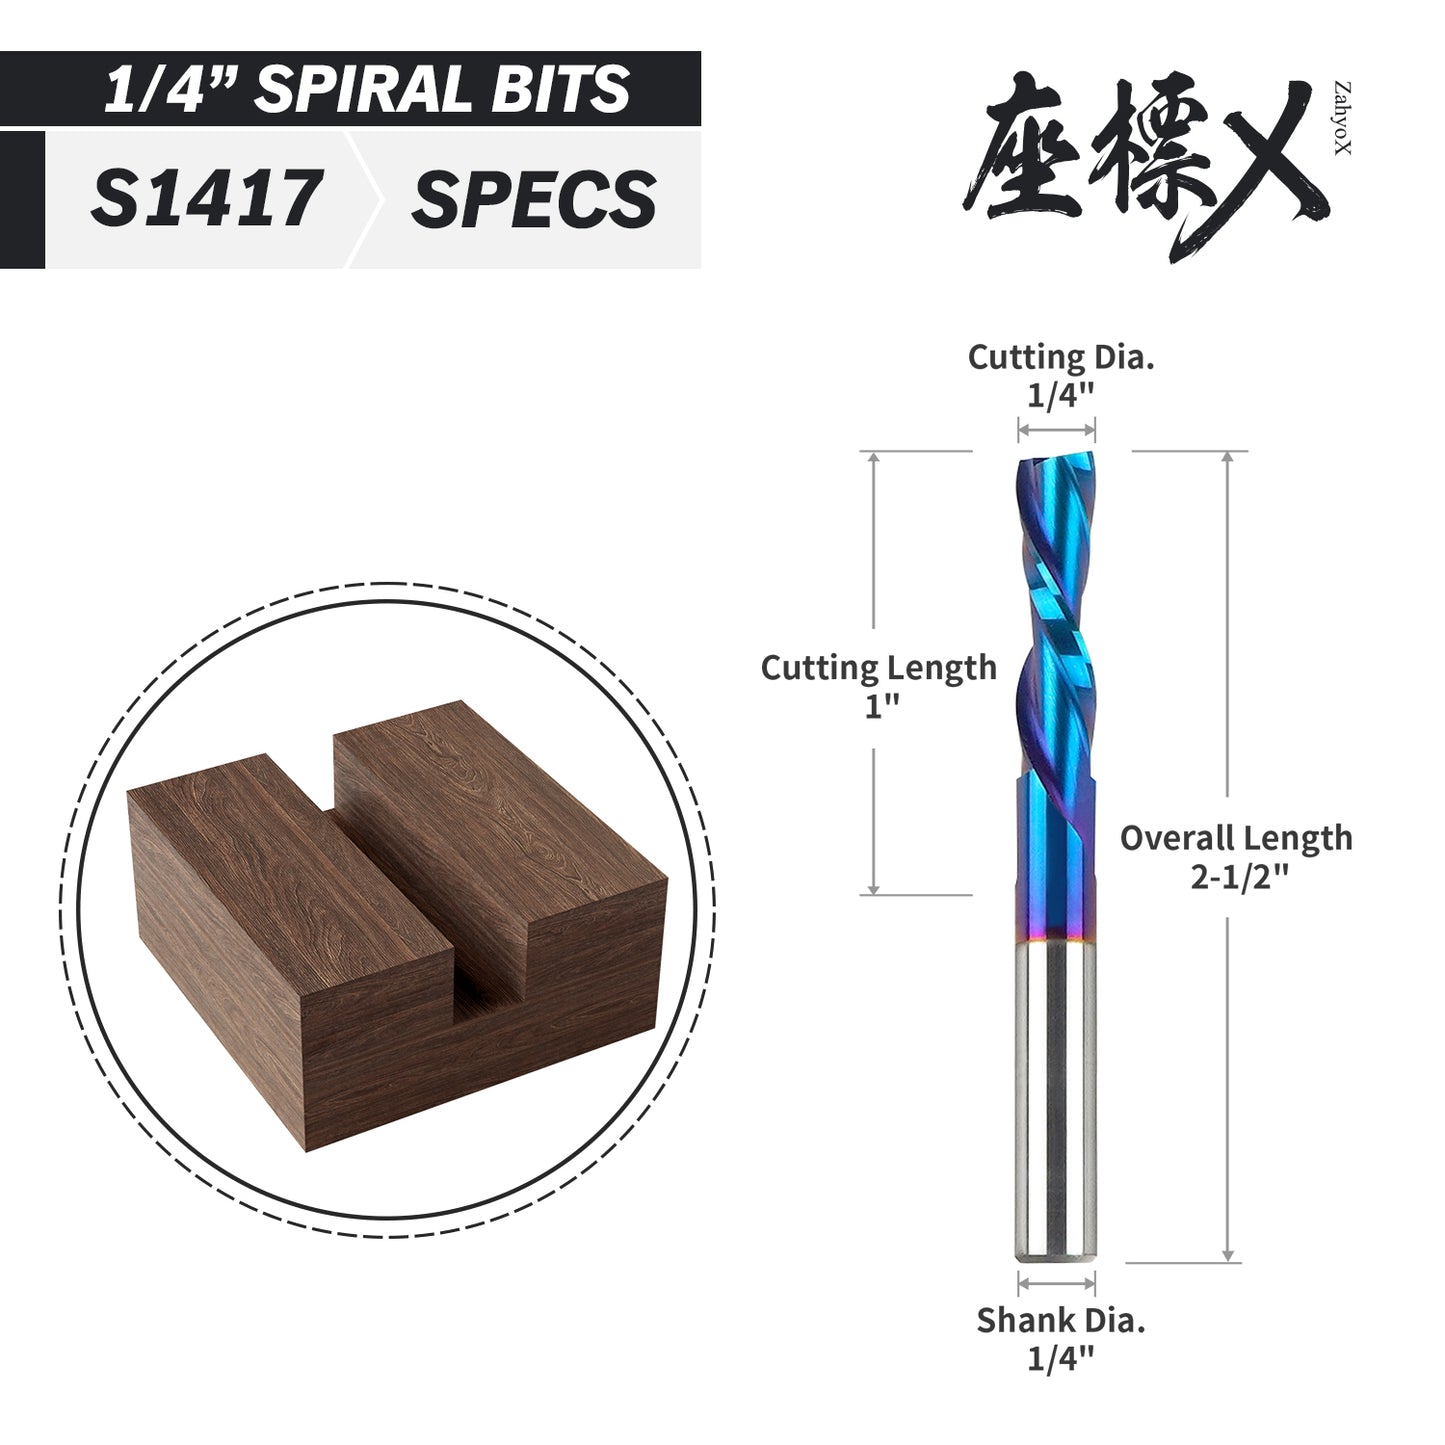 S1417 Solid Carbide Nano Coated Downcut Spiral Router Bit - 2 Flutes - 1/4 SD - 1/4 CD - 1 CL - 2-1/2 OL